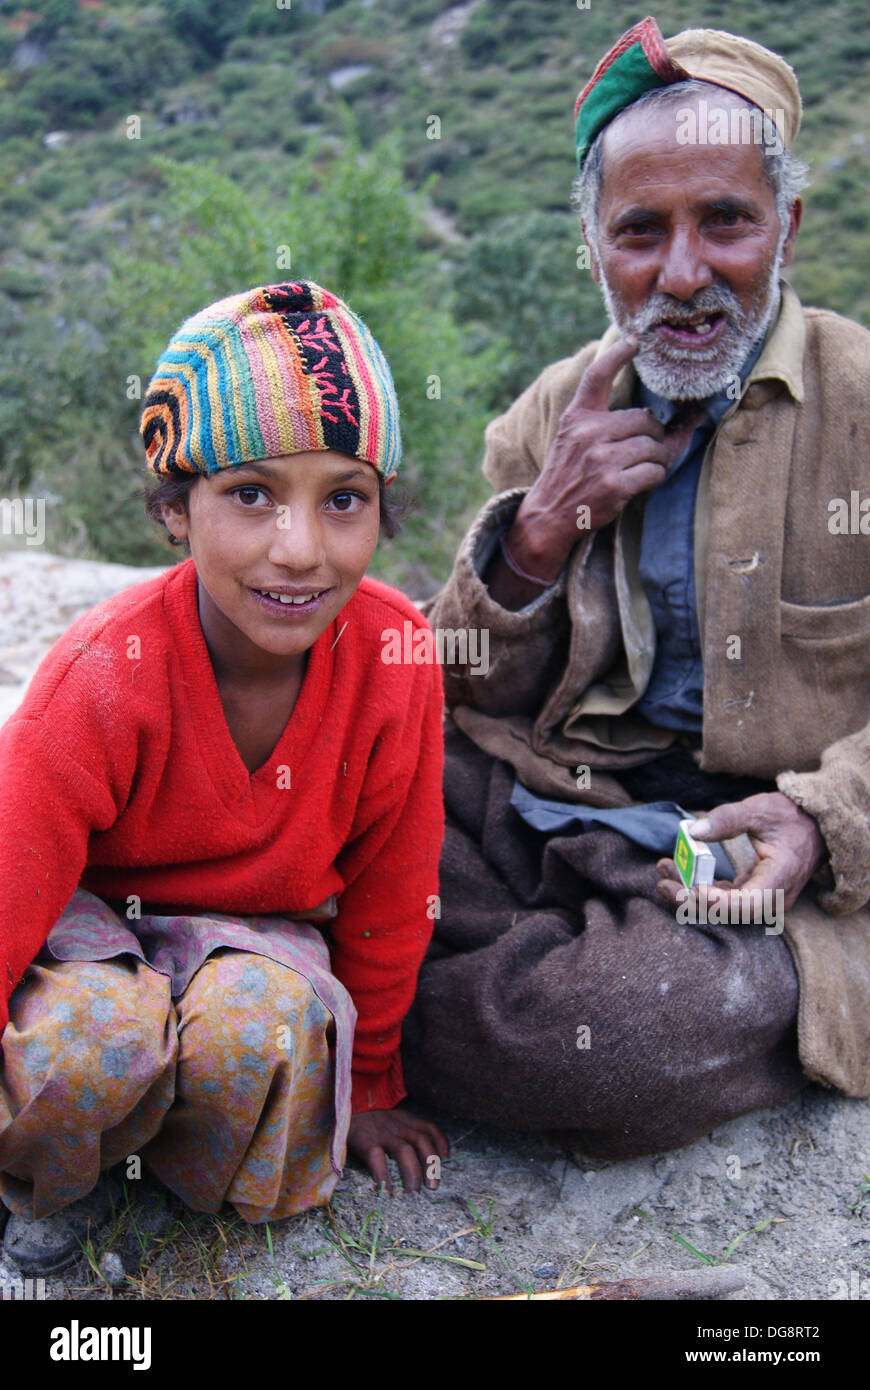 Father and daughter on the Har Ki Doon Trail, Uttarakhand, India Stock Photo